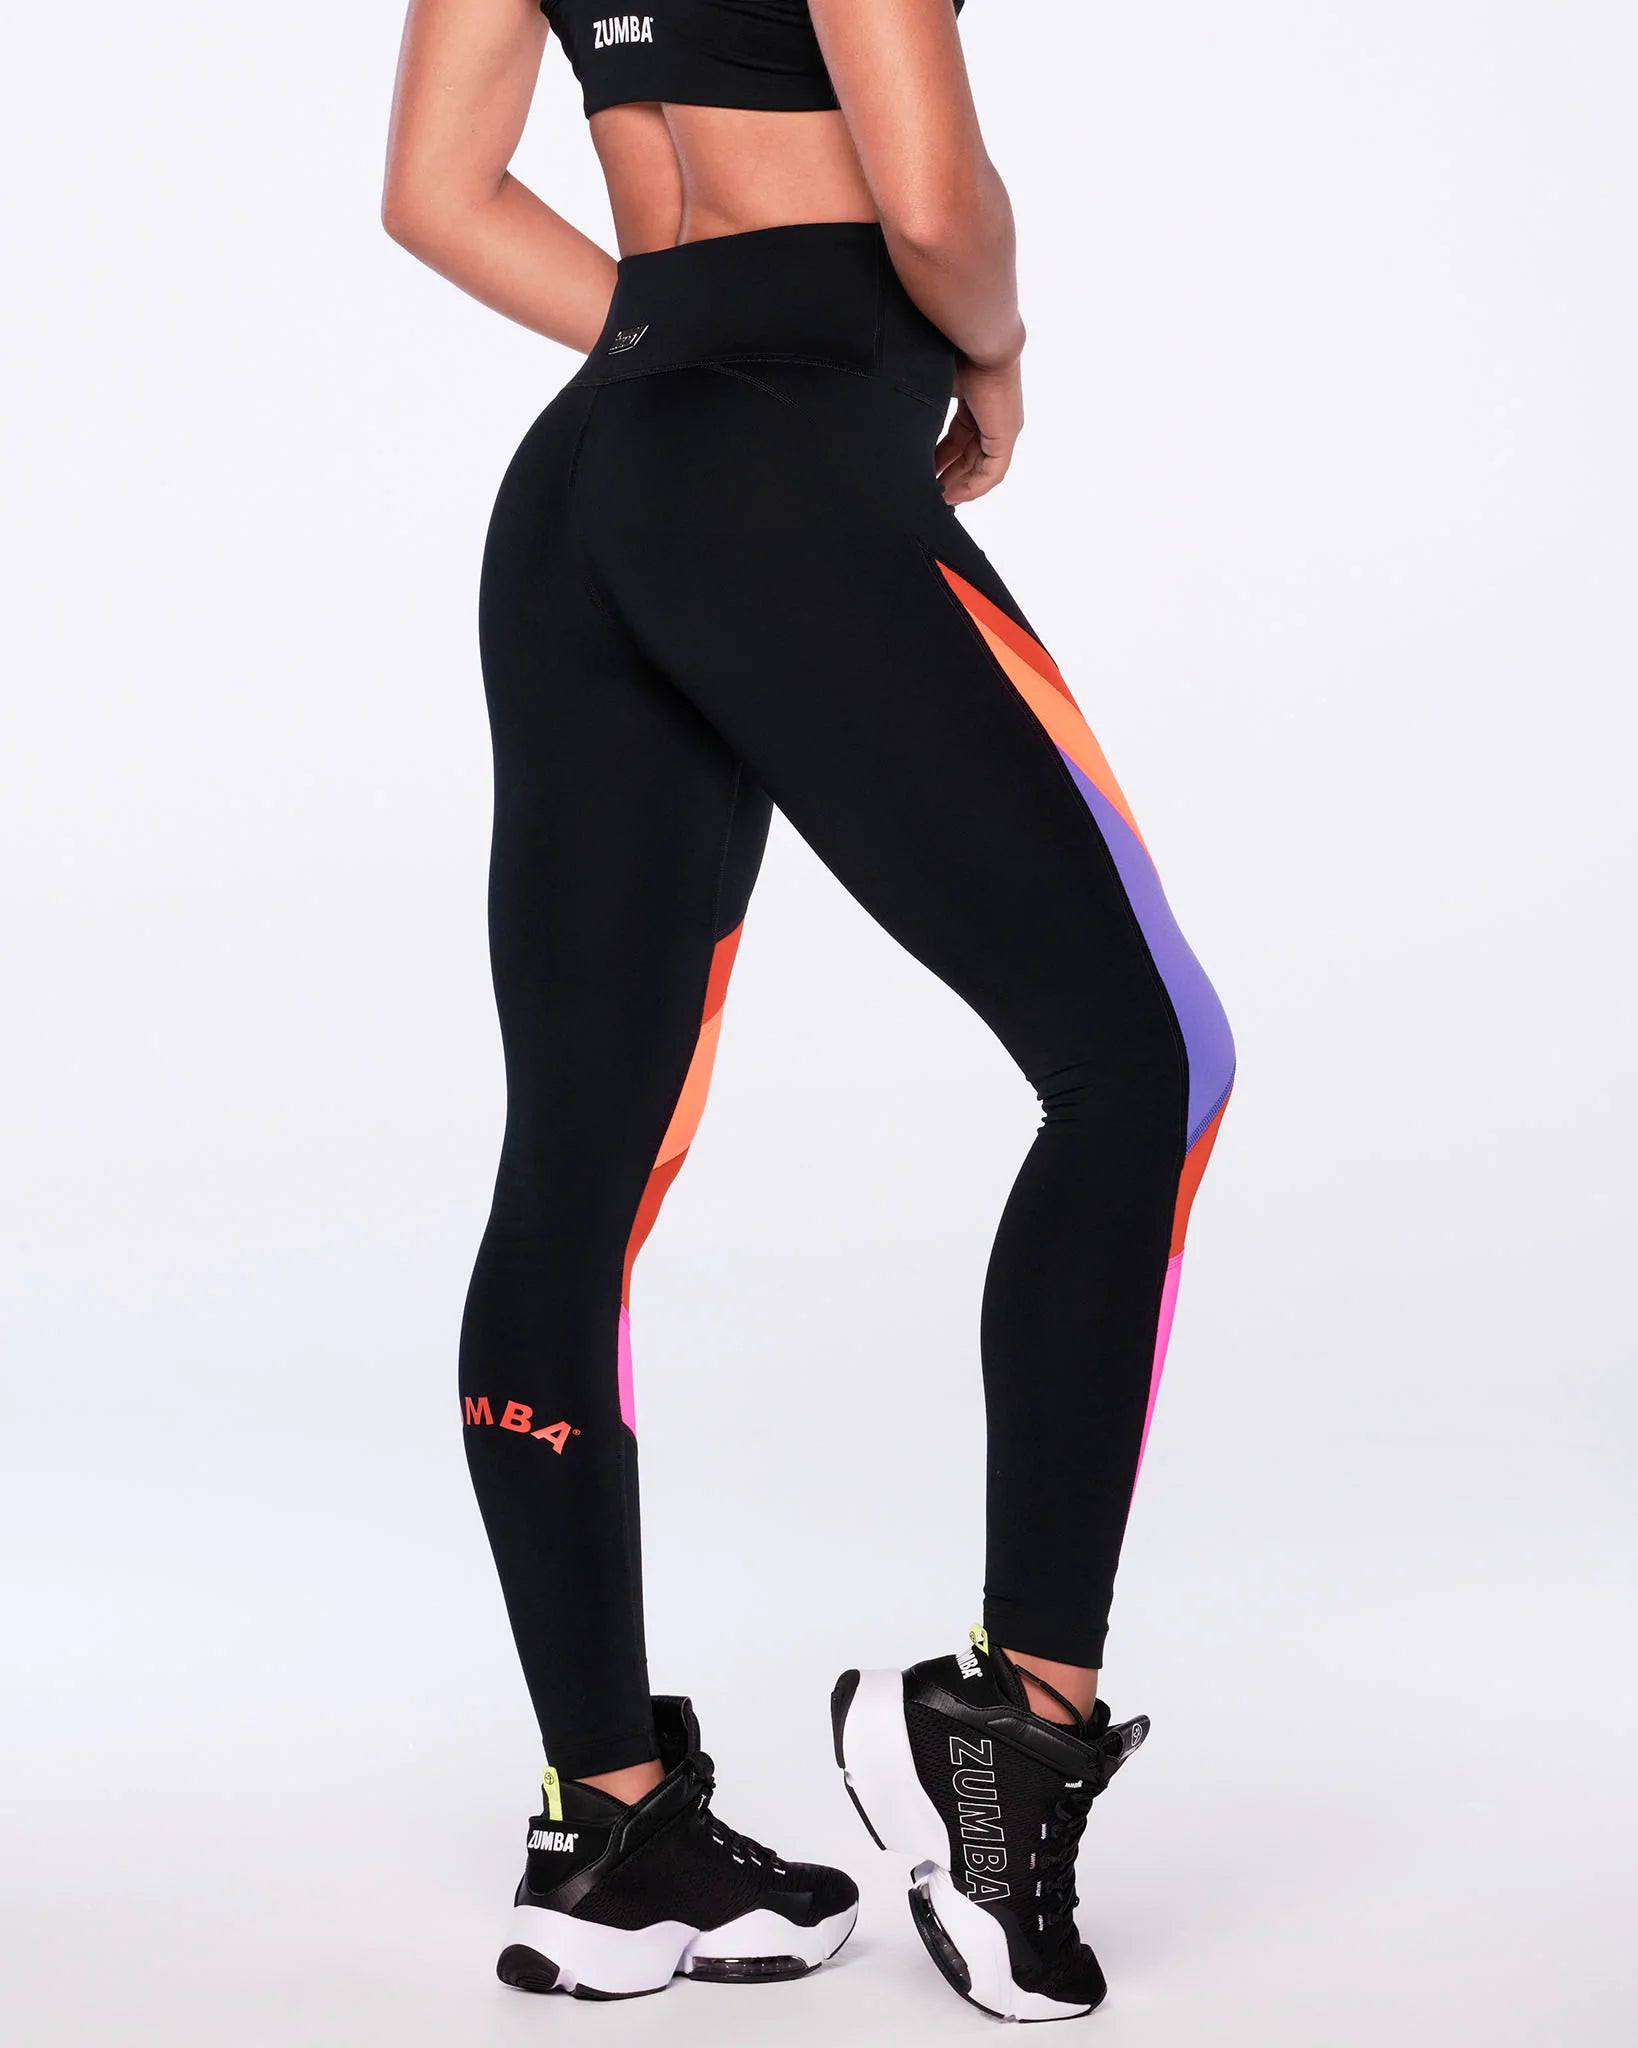 Zumba Muy Caliente High Waisted Ankle Leggings - Black / Turquoise